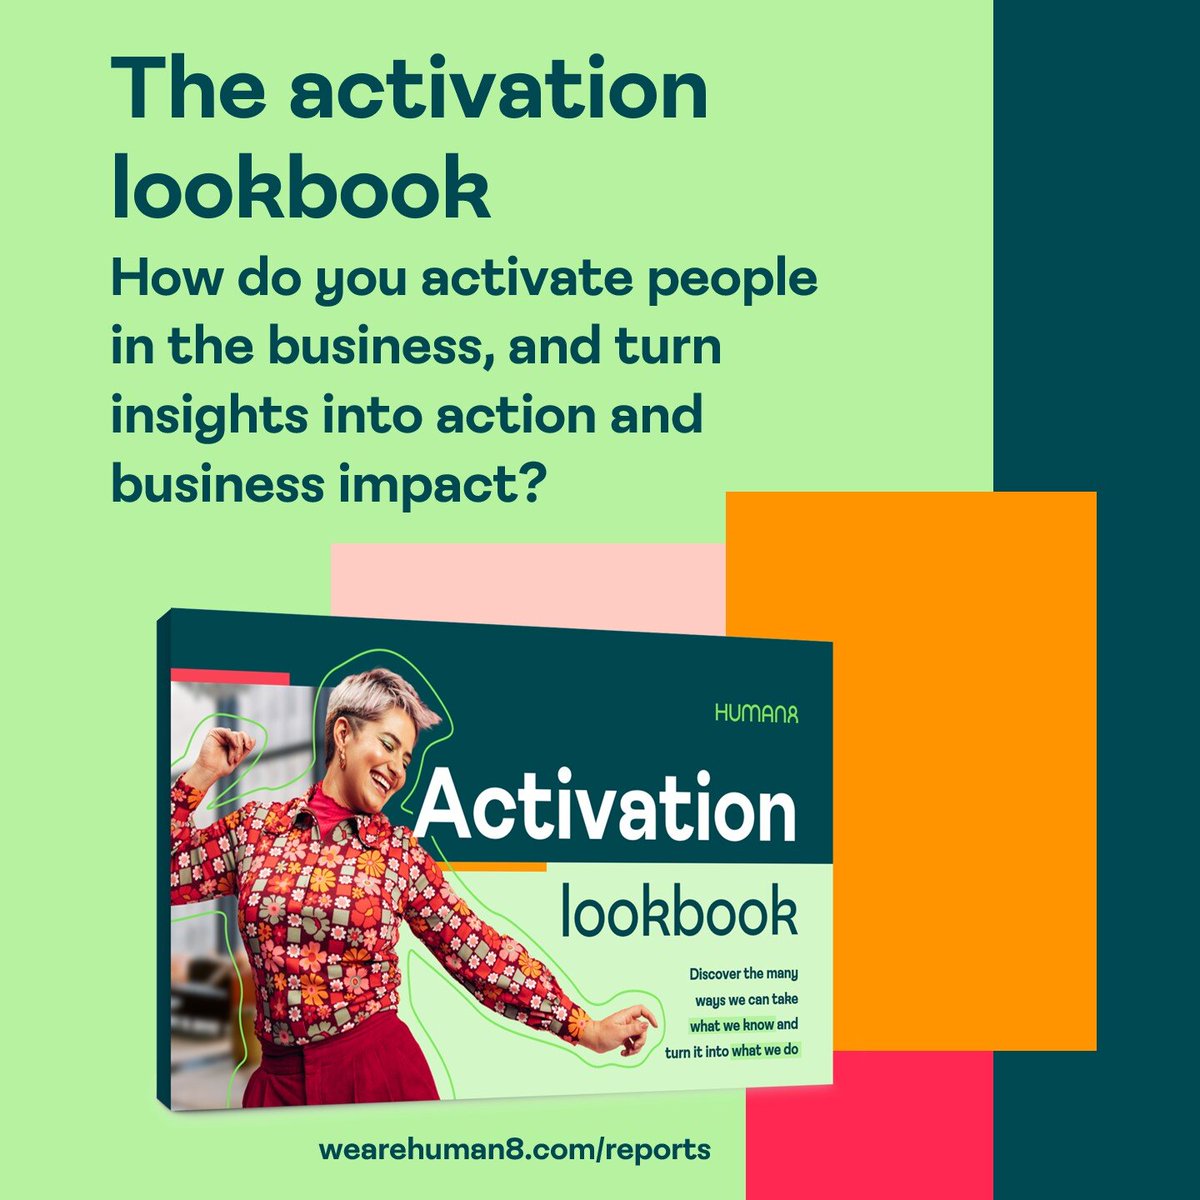 🚨ACTIVATION LOOKBOOK HAS LAUNCHED!🚨 Officially available for download on our website, our newest eBook is a guide to the step after you gather the insight: putting the findings into action 👉inspire.wearehuman8.com/4d6HGPI #activation #researchreport #dowhatmatters